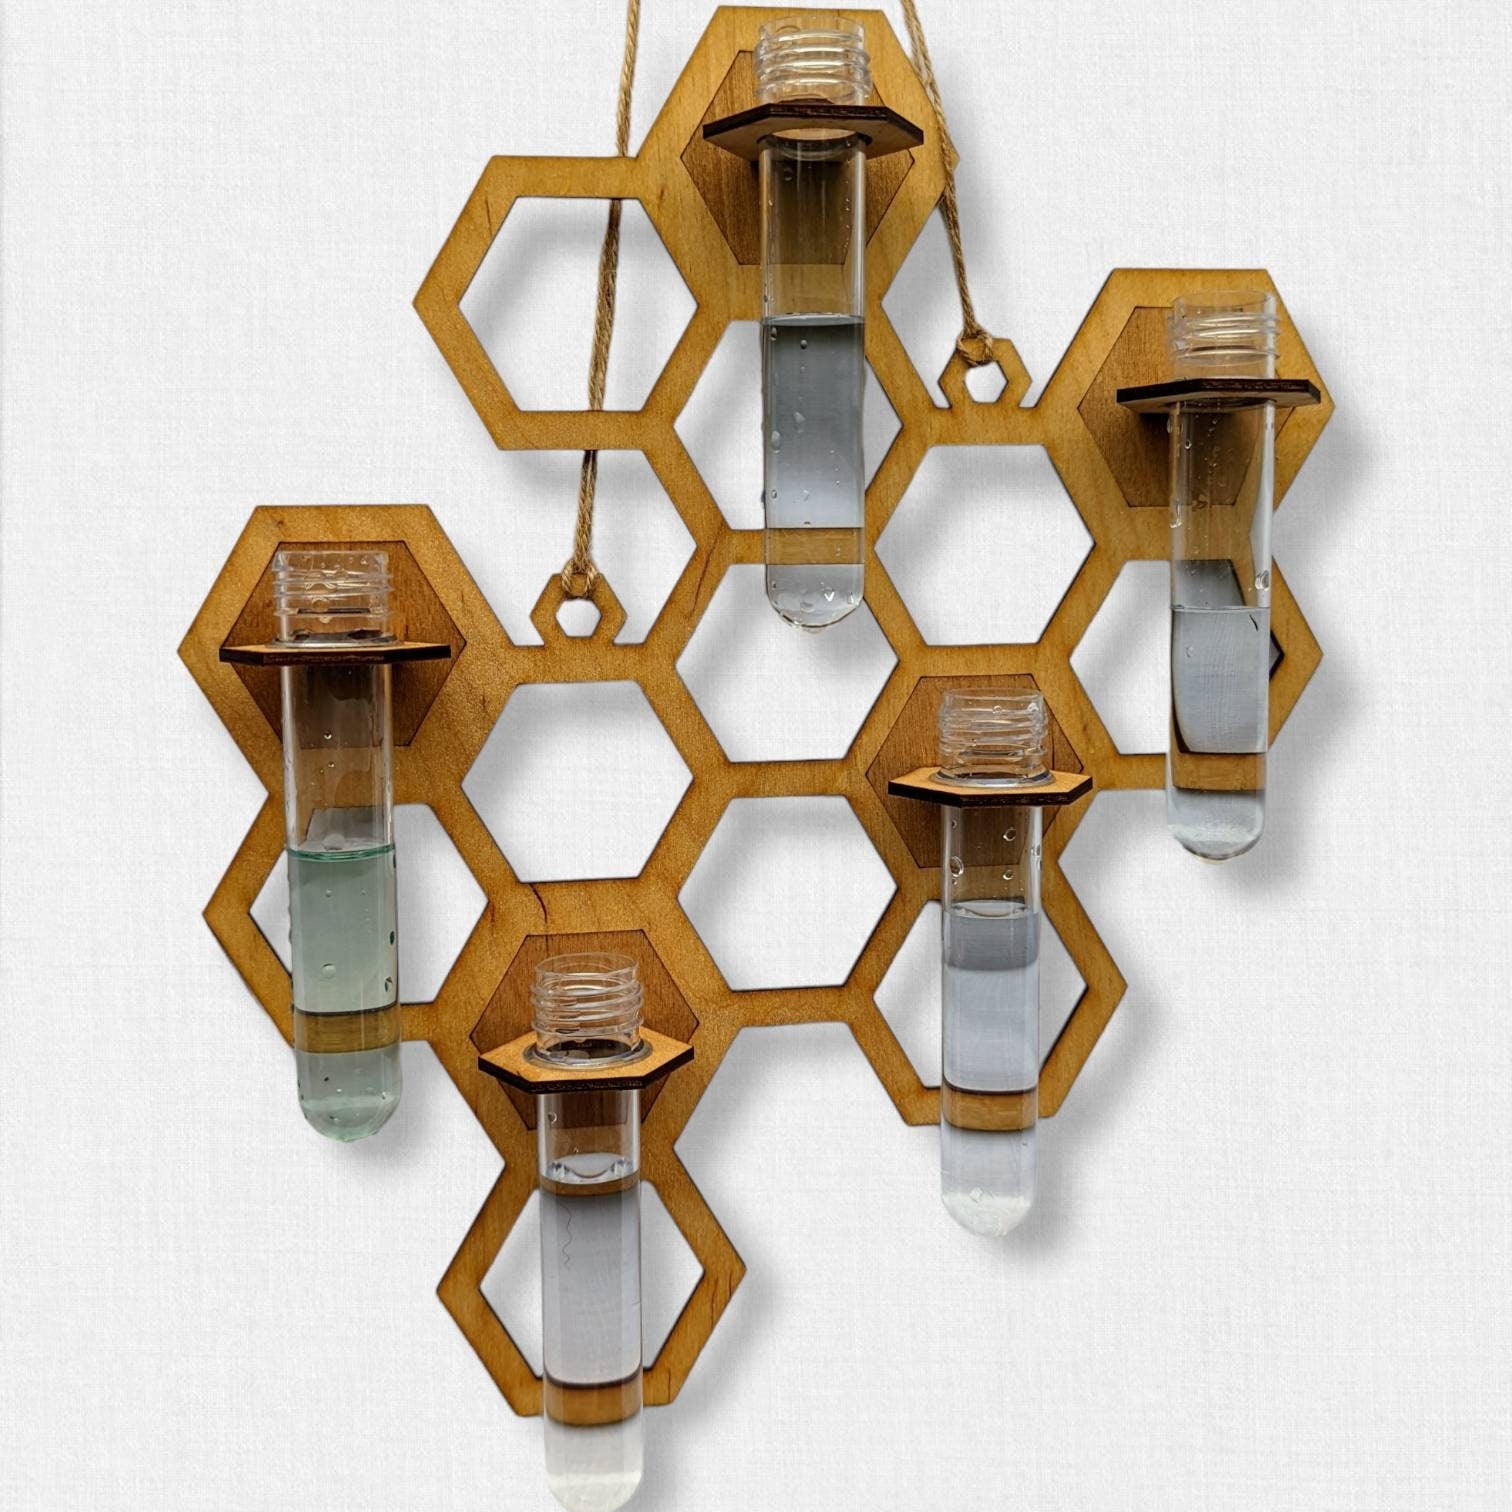 Honeycomb wall hanging propagation station. Minimalist gift for mom. Gift for sister. Hanging vase. Wildflower, small House plants bees